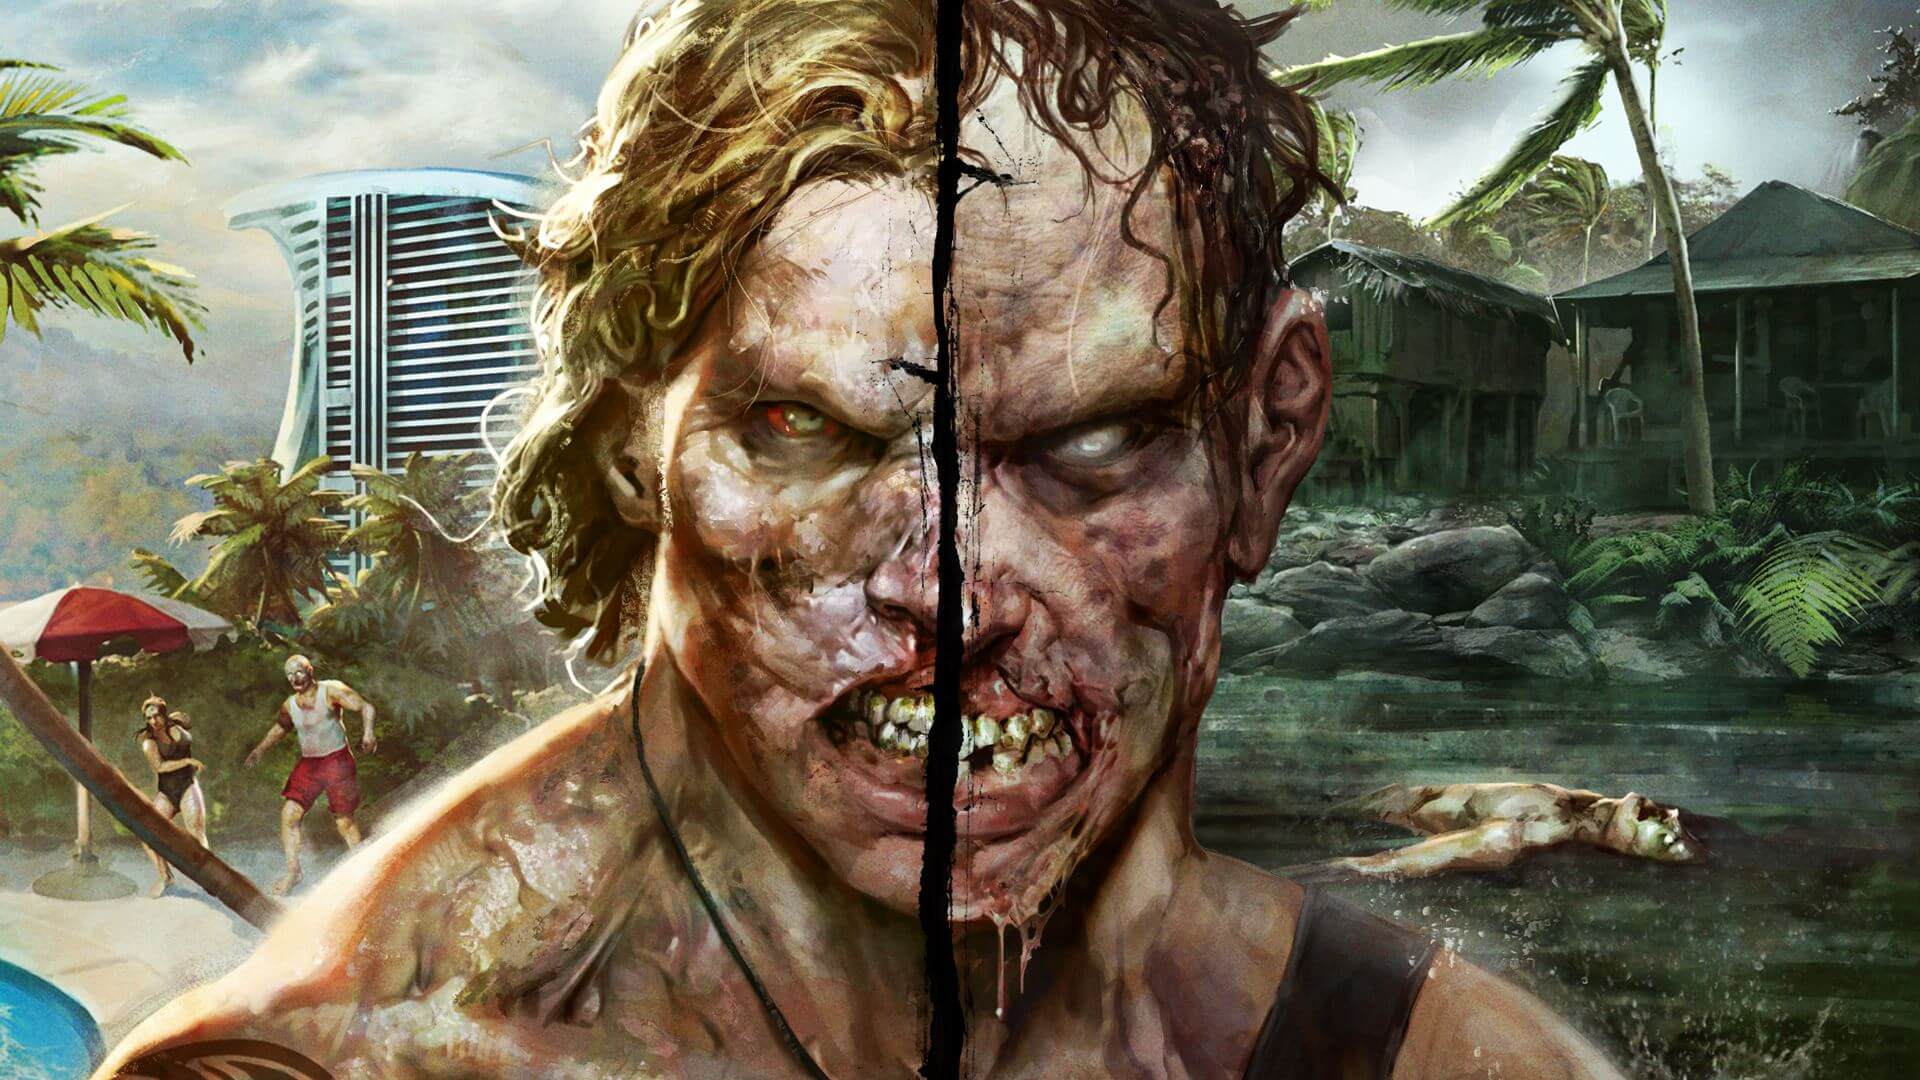 Dead Island Definitive Edition review – Techland's zombies are back from  the dead